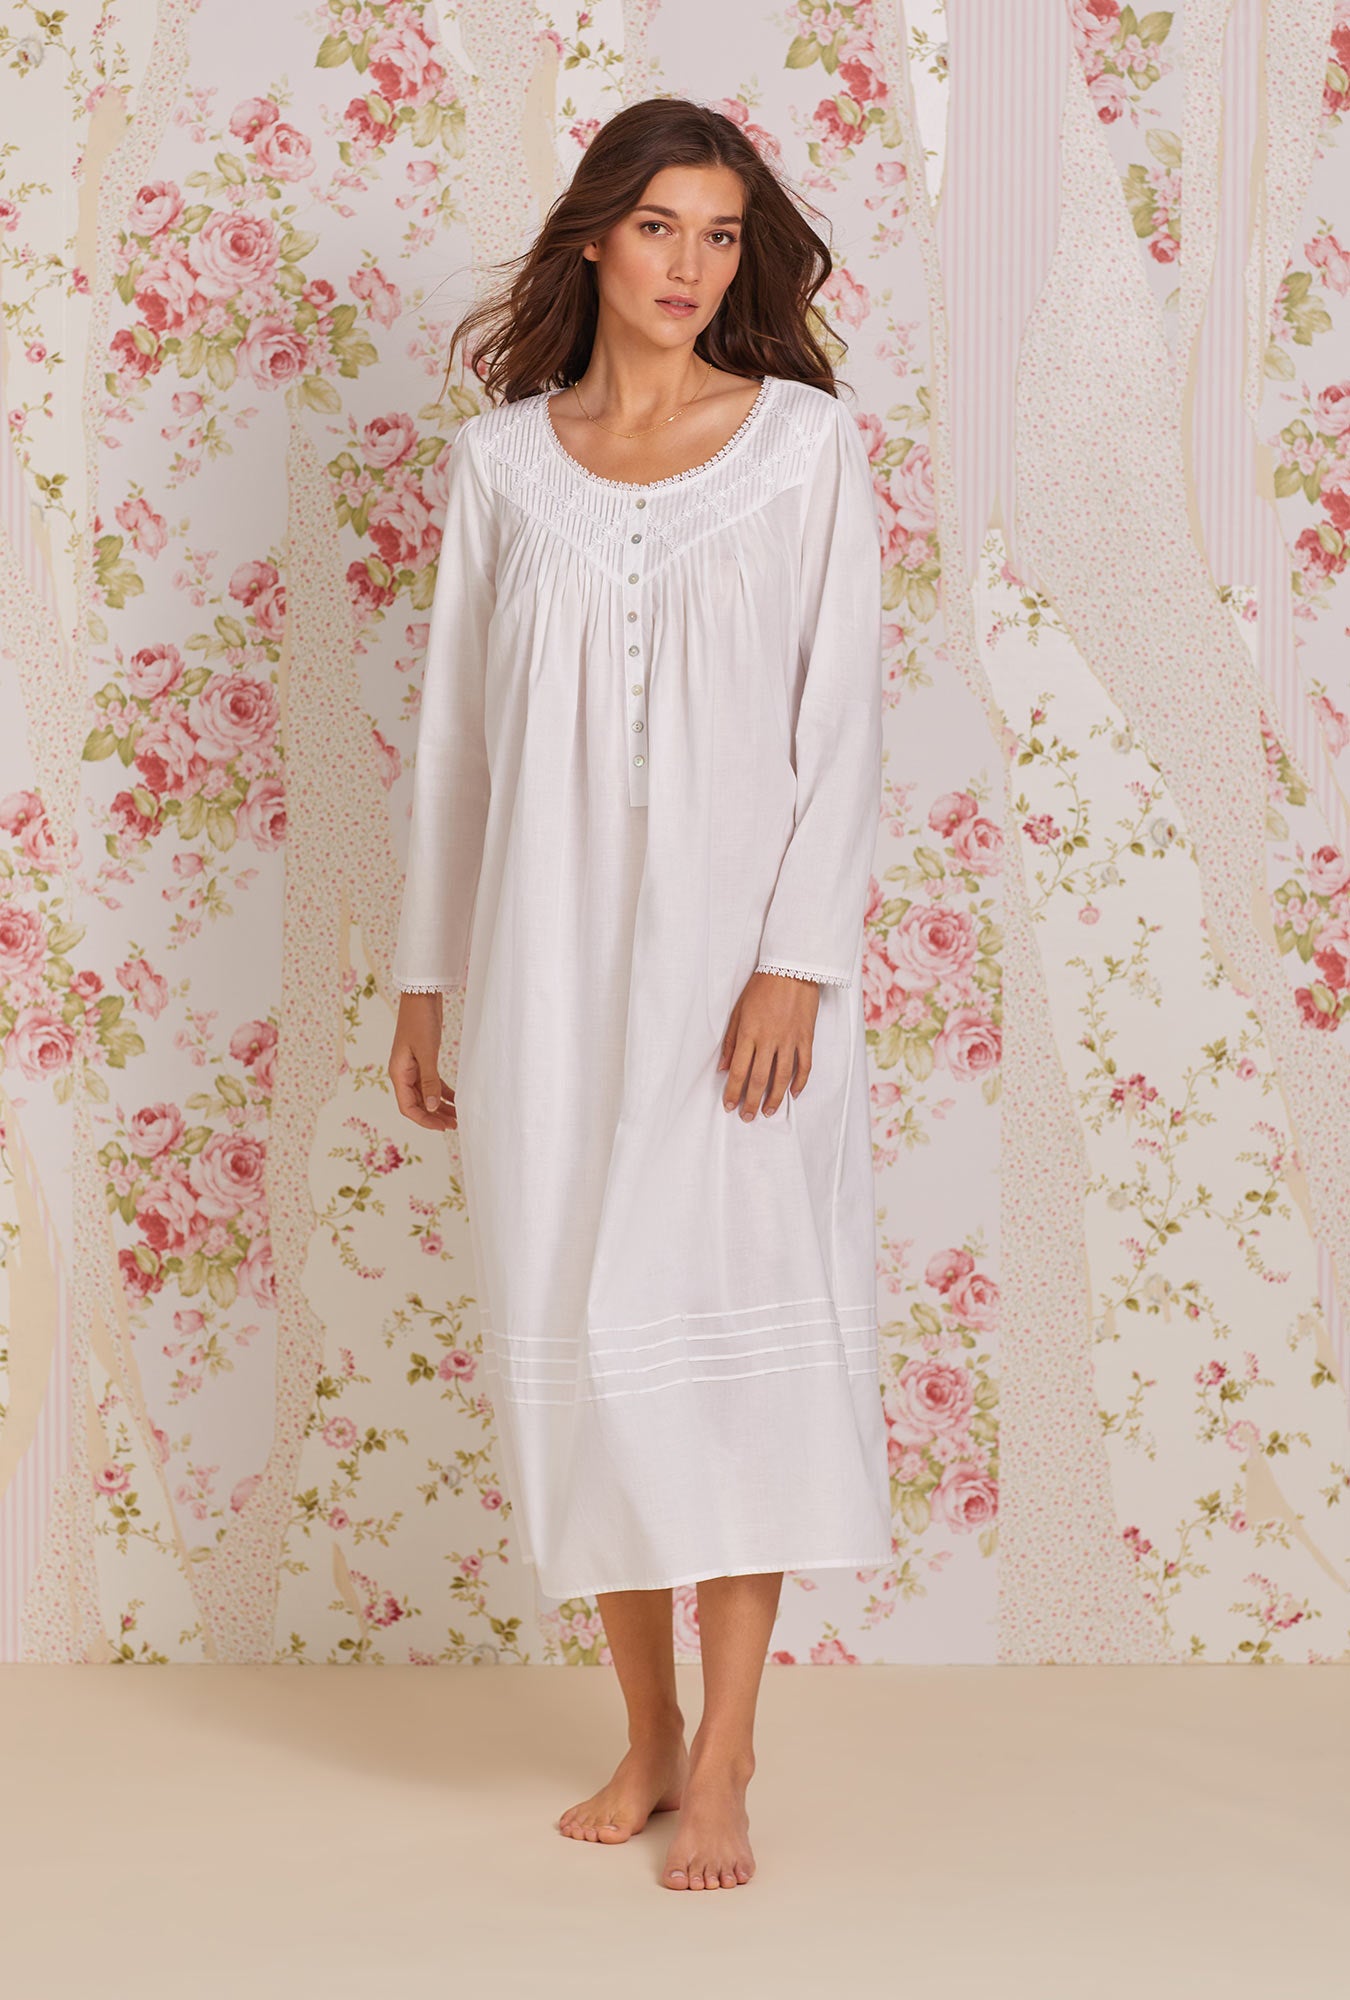 A lady wearing white long sleeve poetic nightgown.